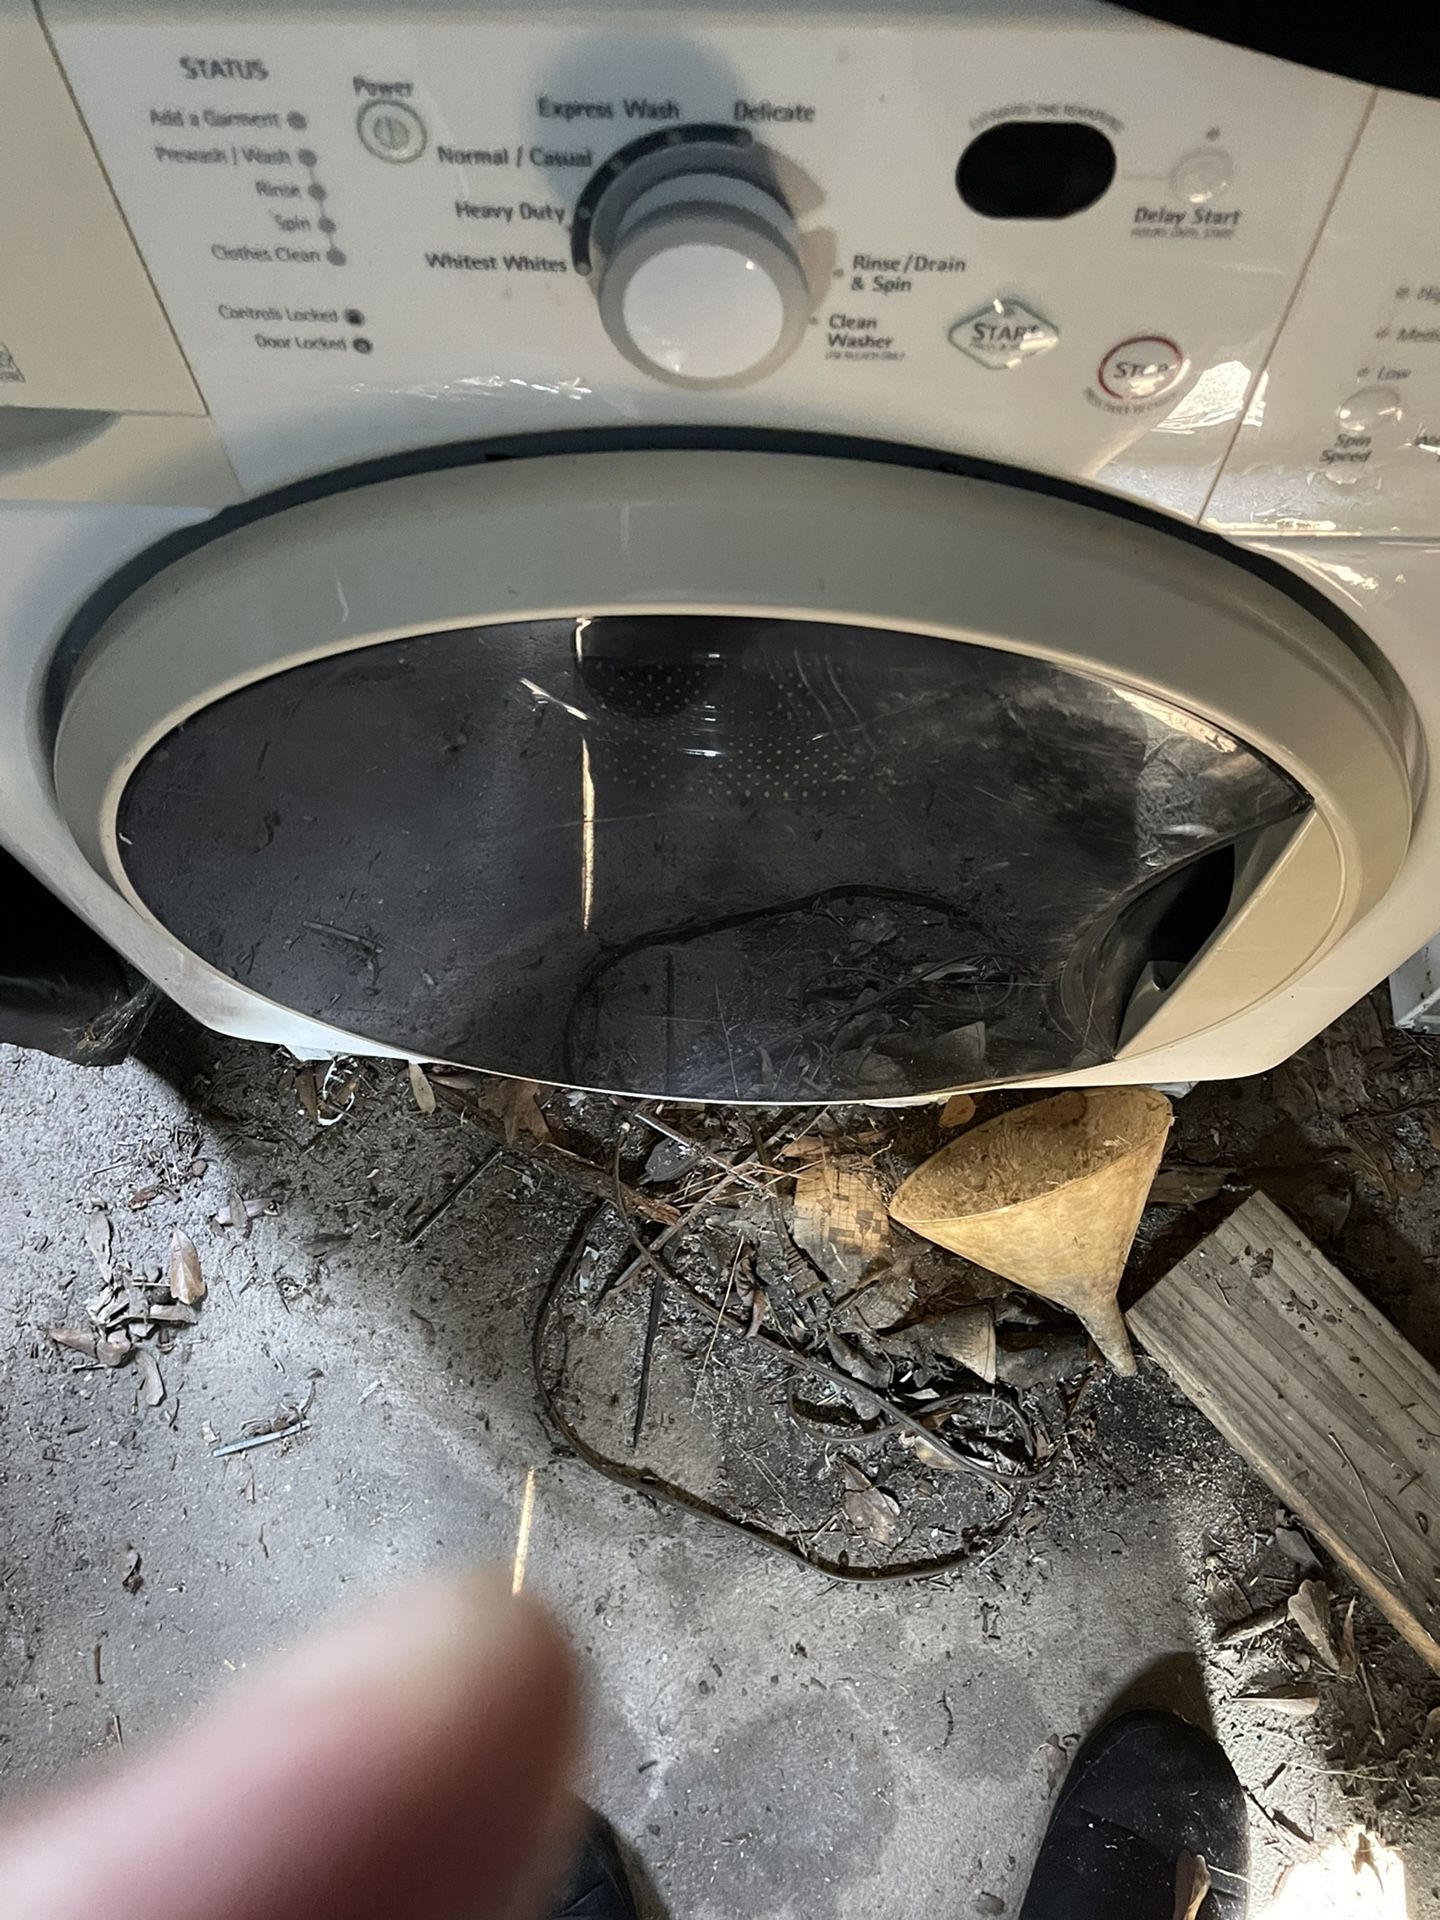 For sale Used washer And dryer? Good Condition. $75 Dollars For Each!! 